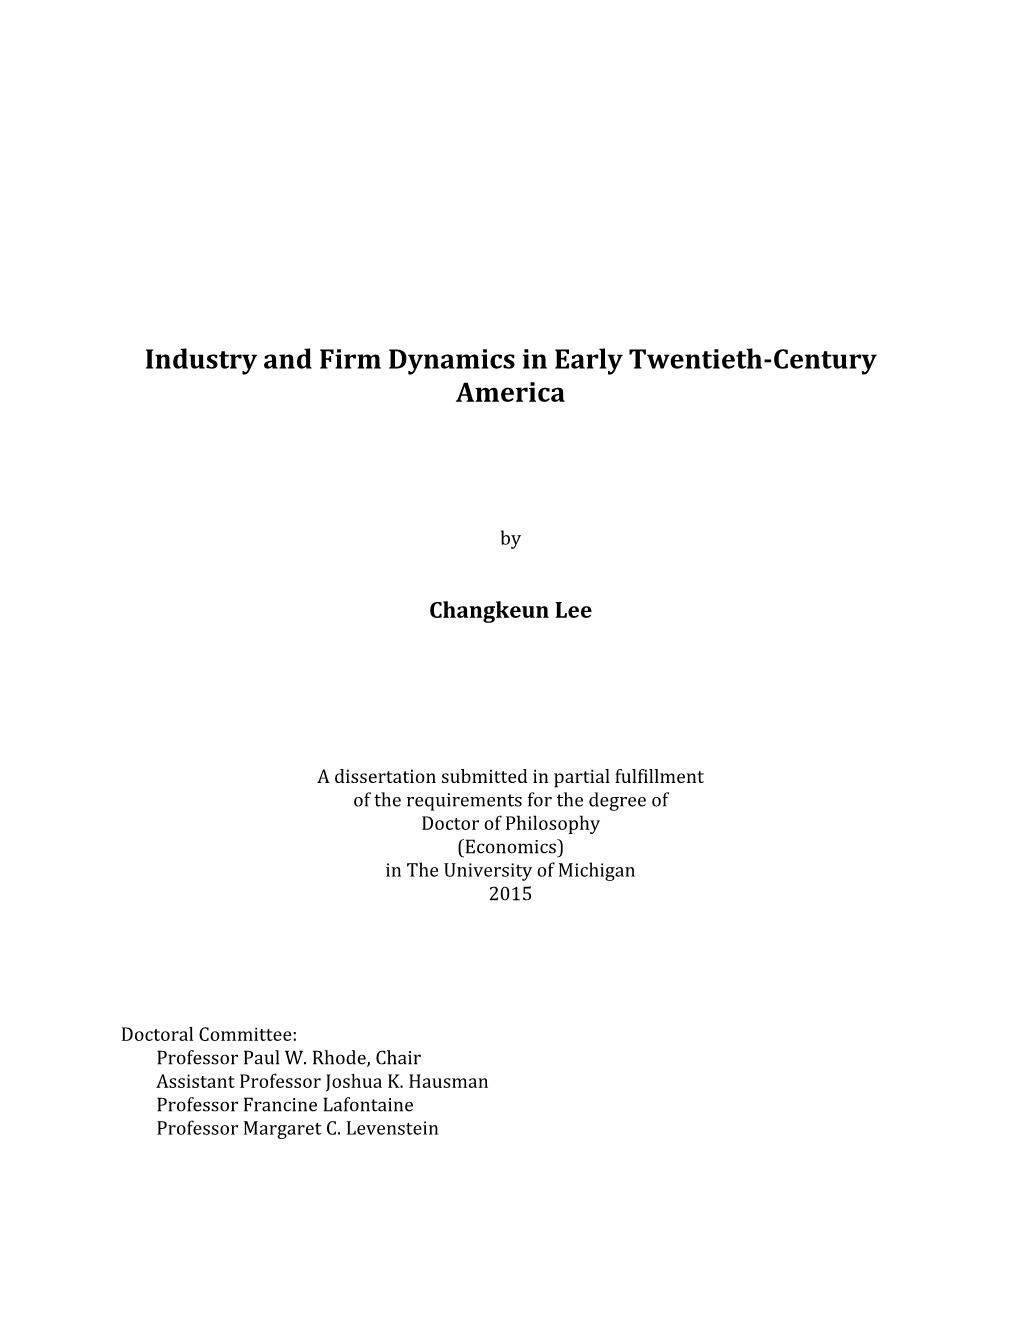 Industry and Firm Dynamics in Early Twentieth-Century America